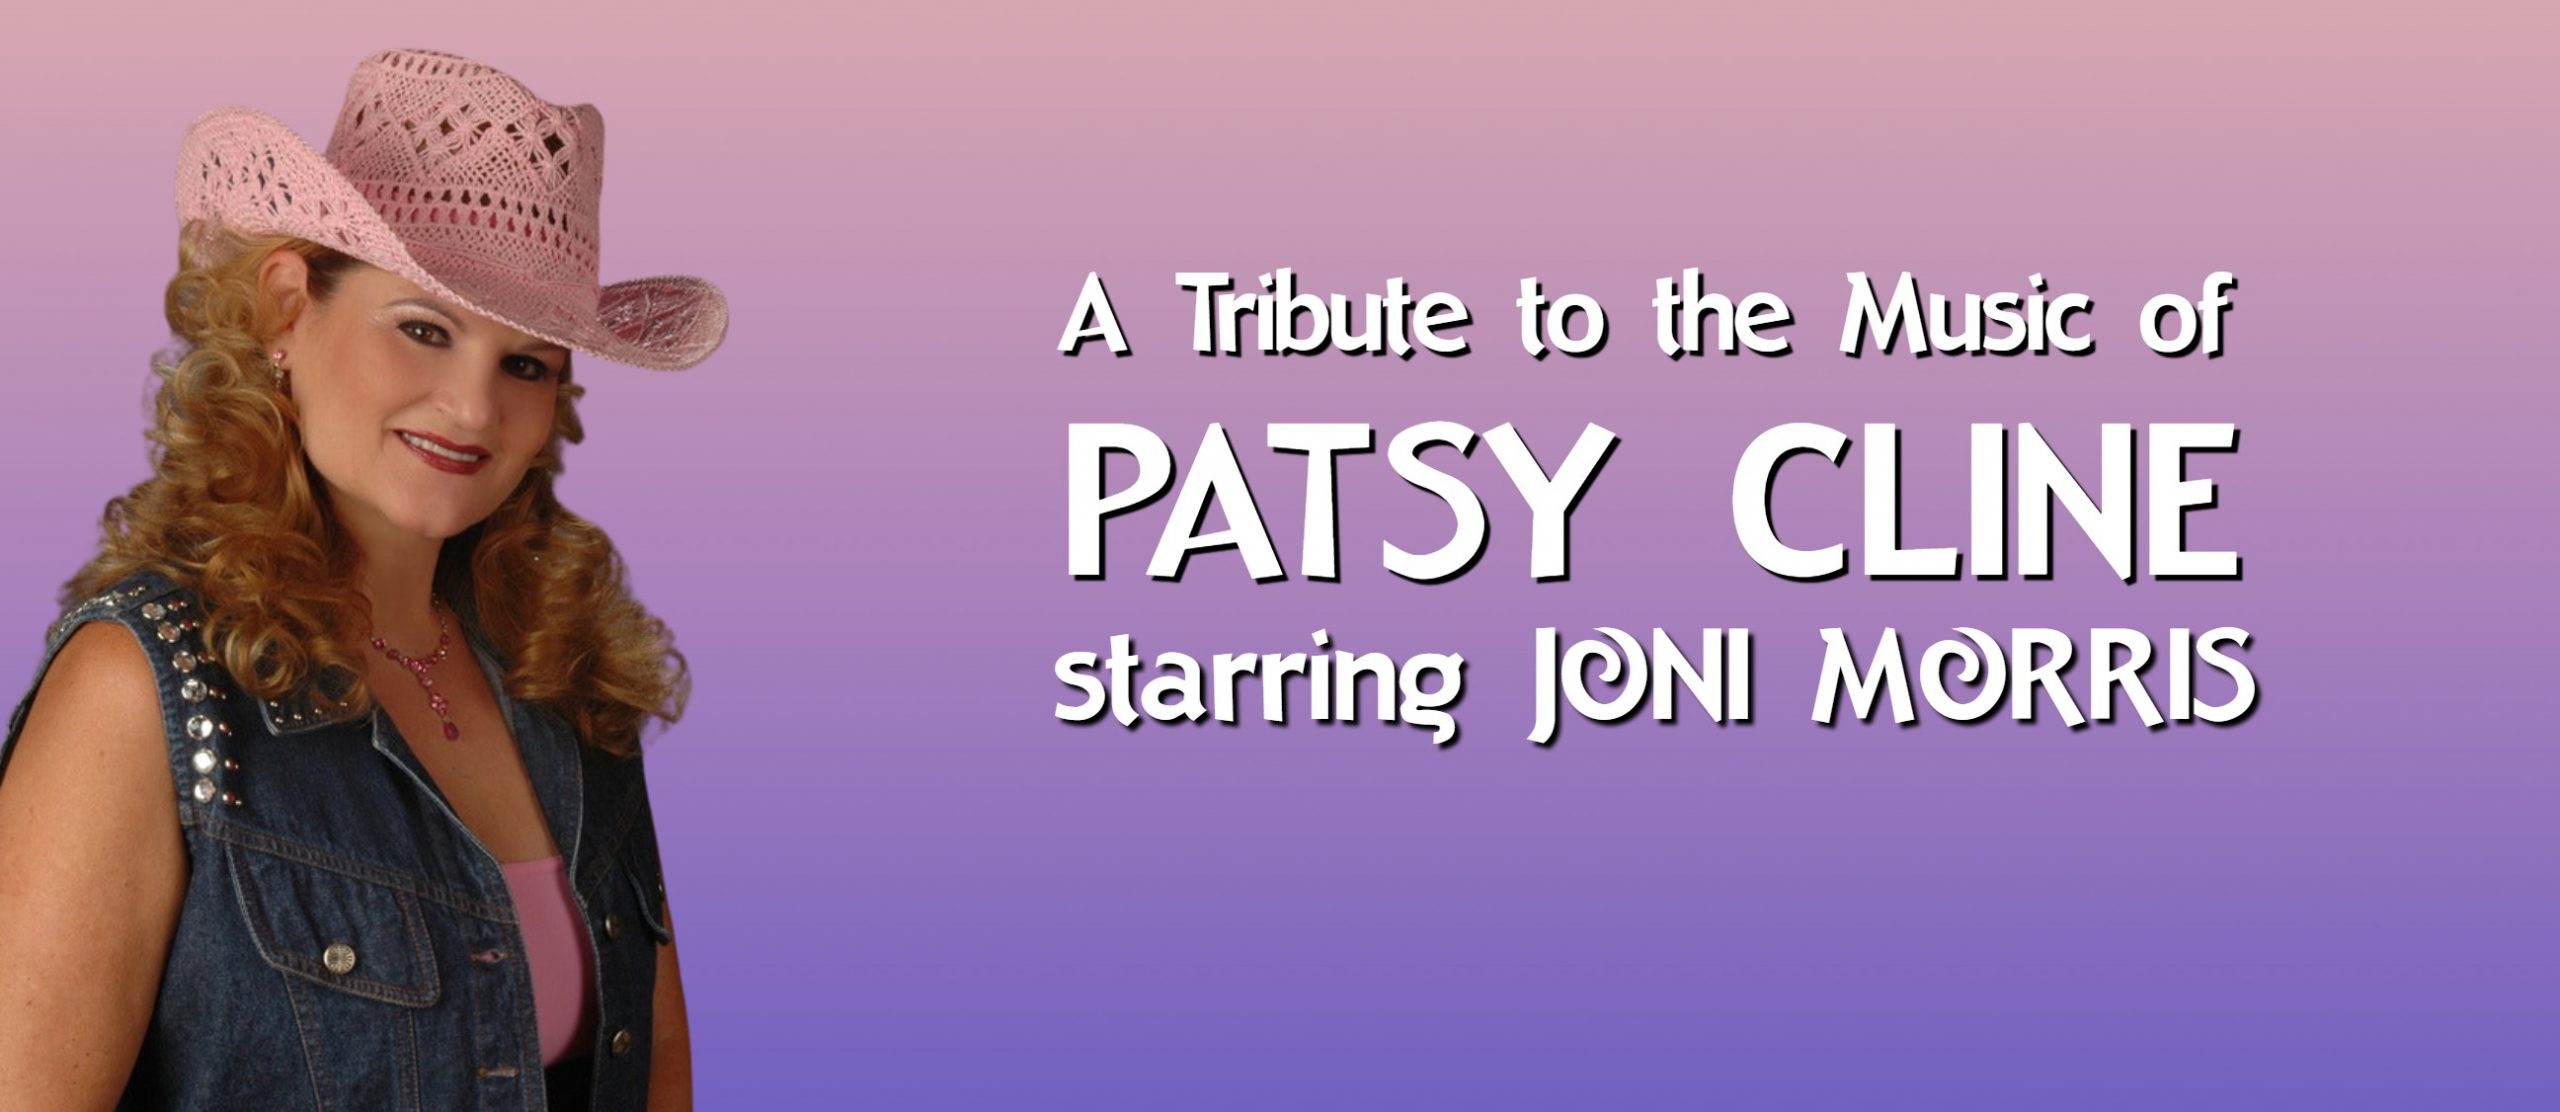 A Tribute to the Music of Patsy Cline Starring Joni Morris